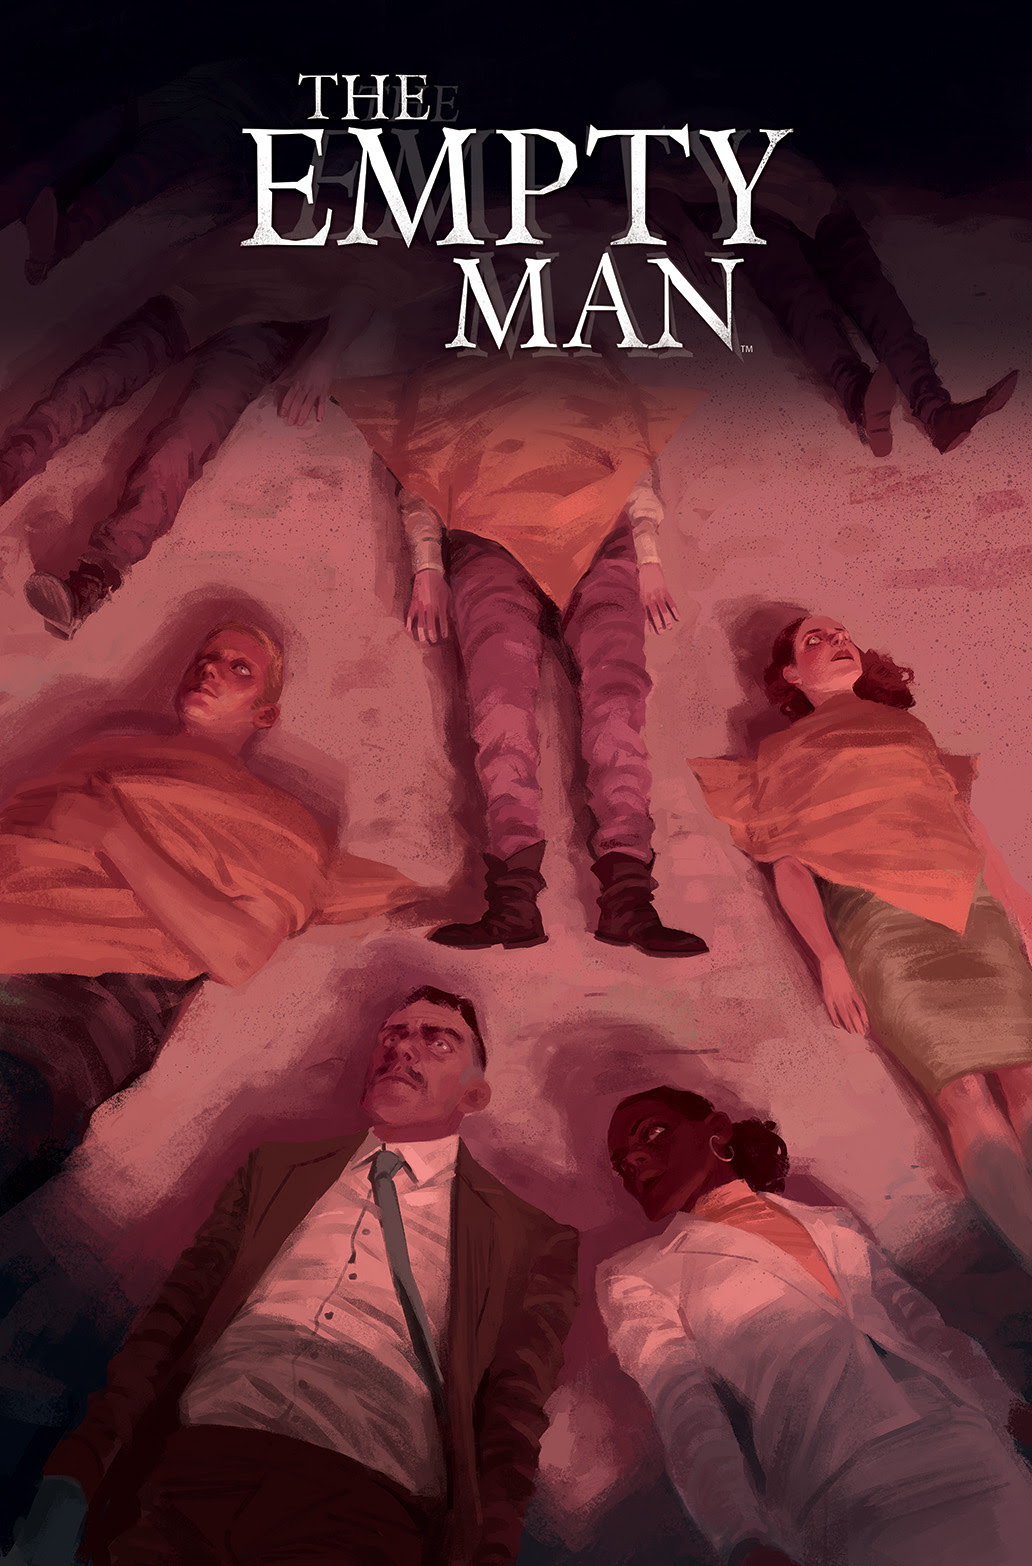 THE EMPTY MAN #1 Cover A by Vanesa R. Del Rey